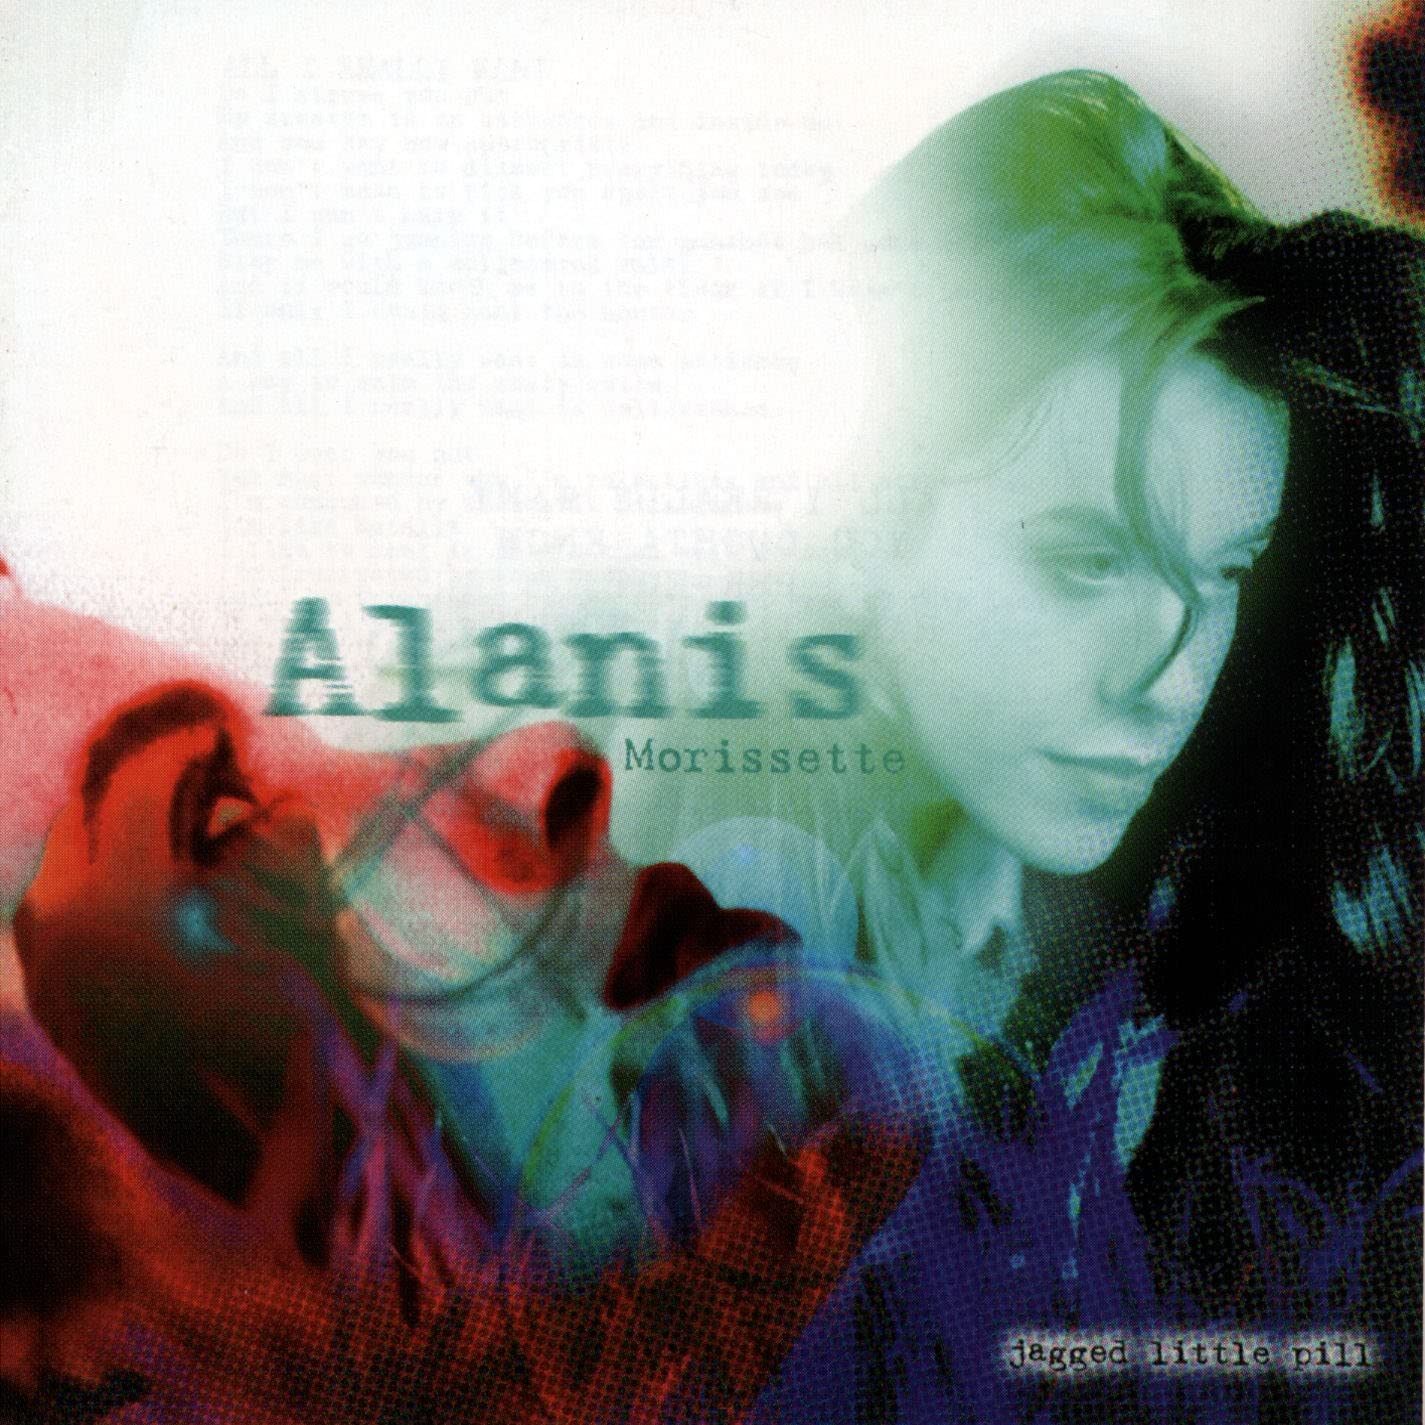 Legendary 3rd studio album on Vinyl from Alanis Morissette featuring the singles 'You Oughta Know', 'Hand in My Pocket', 'Ironic', 'You Learn', 'Head Over Feet' and 'All I Really Want'.